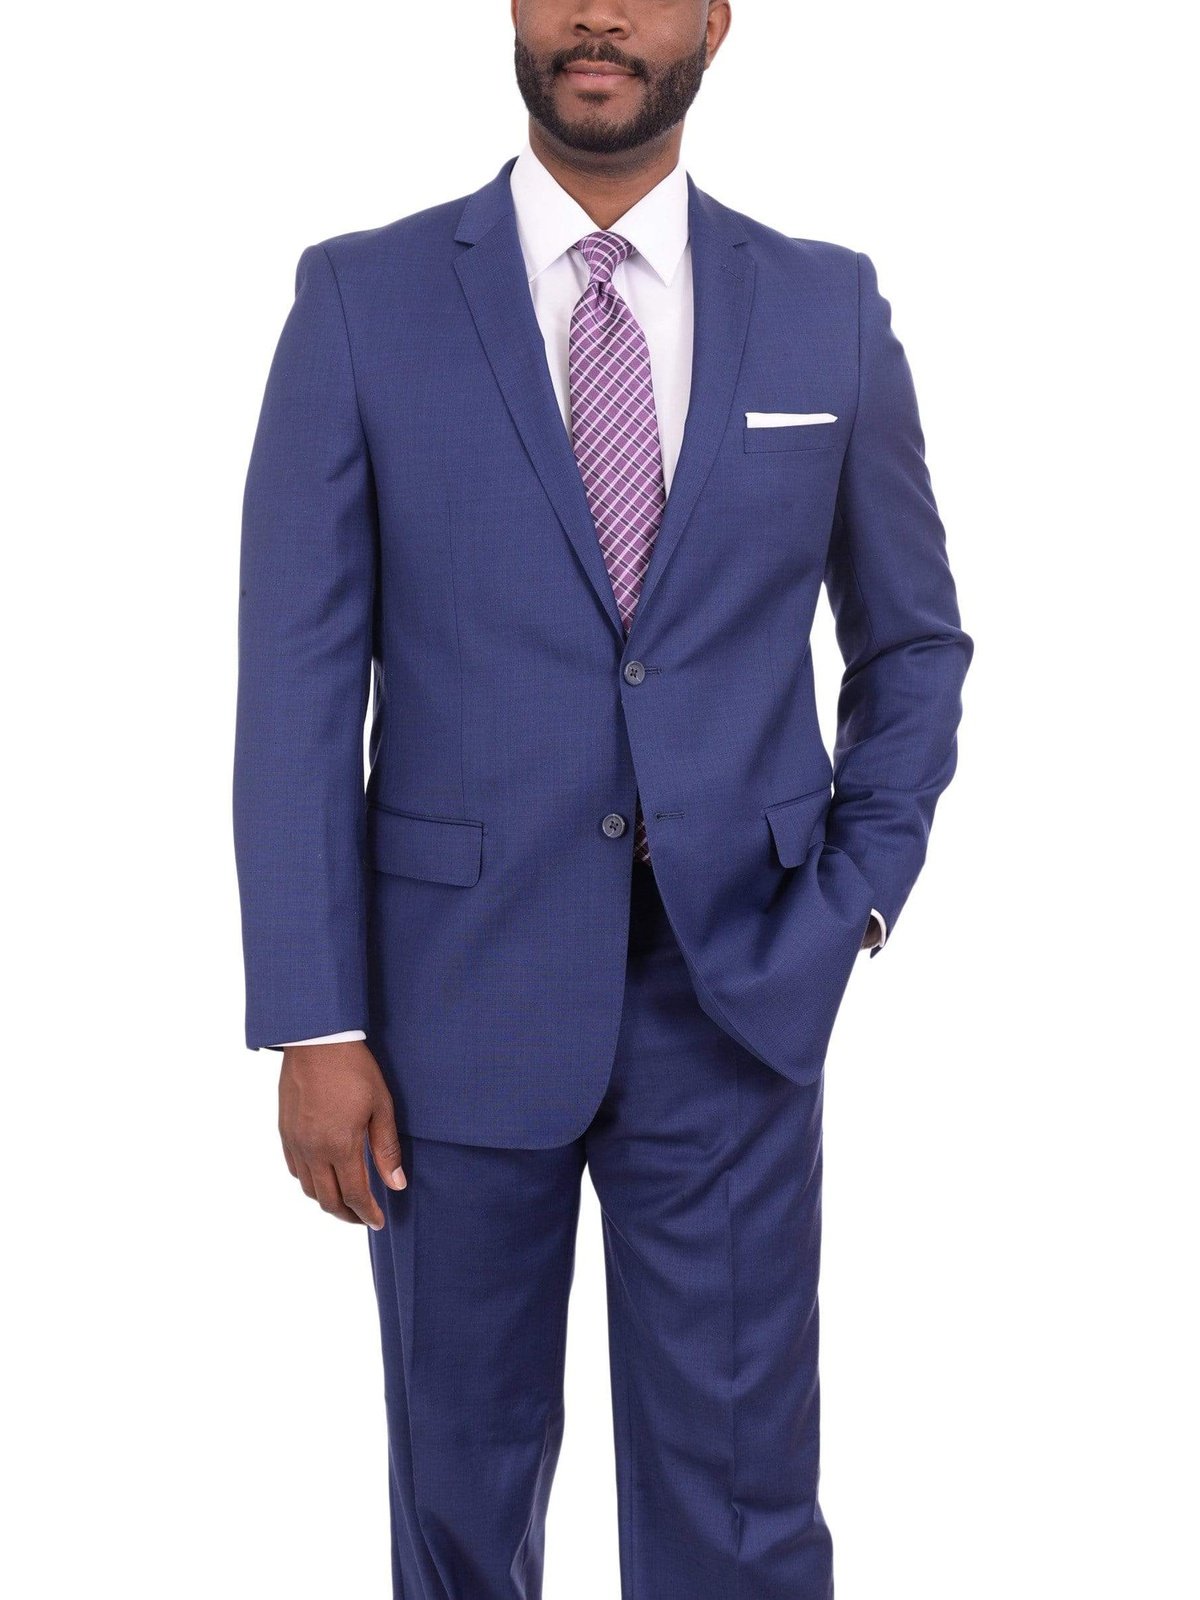 Giorgio Cosani TWO PIECE SUITS 40S Giorgio Cosani Regular Fit Solid Royal Blue Two Button Wool Cashmere Blend Suit